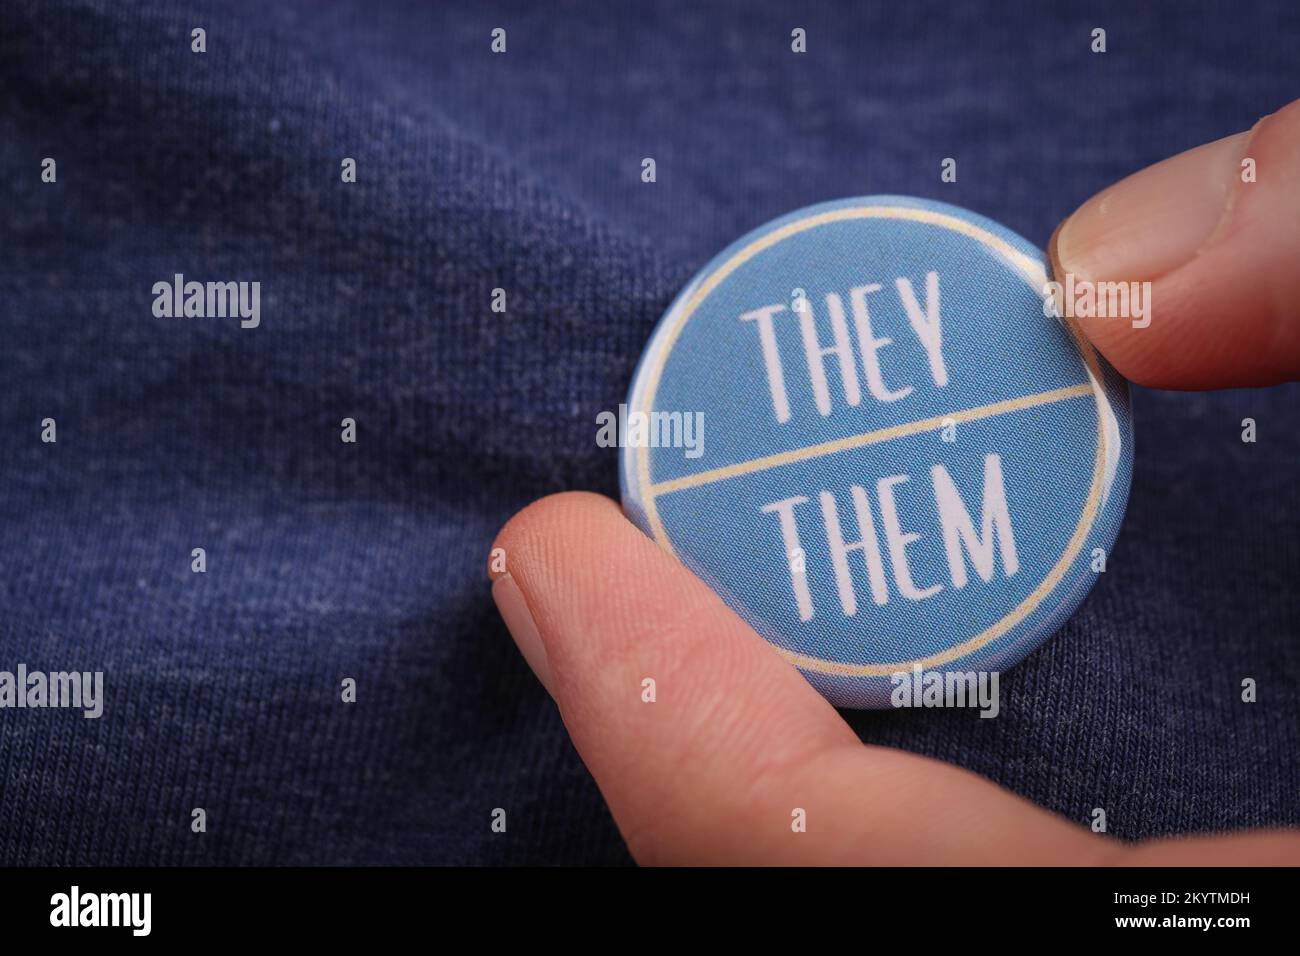 A person showing their They Them pronouns by wearing a badge. Stock Photo